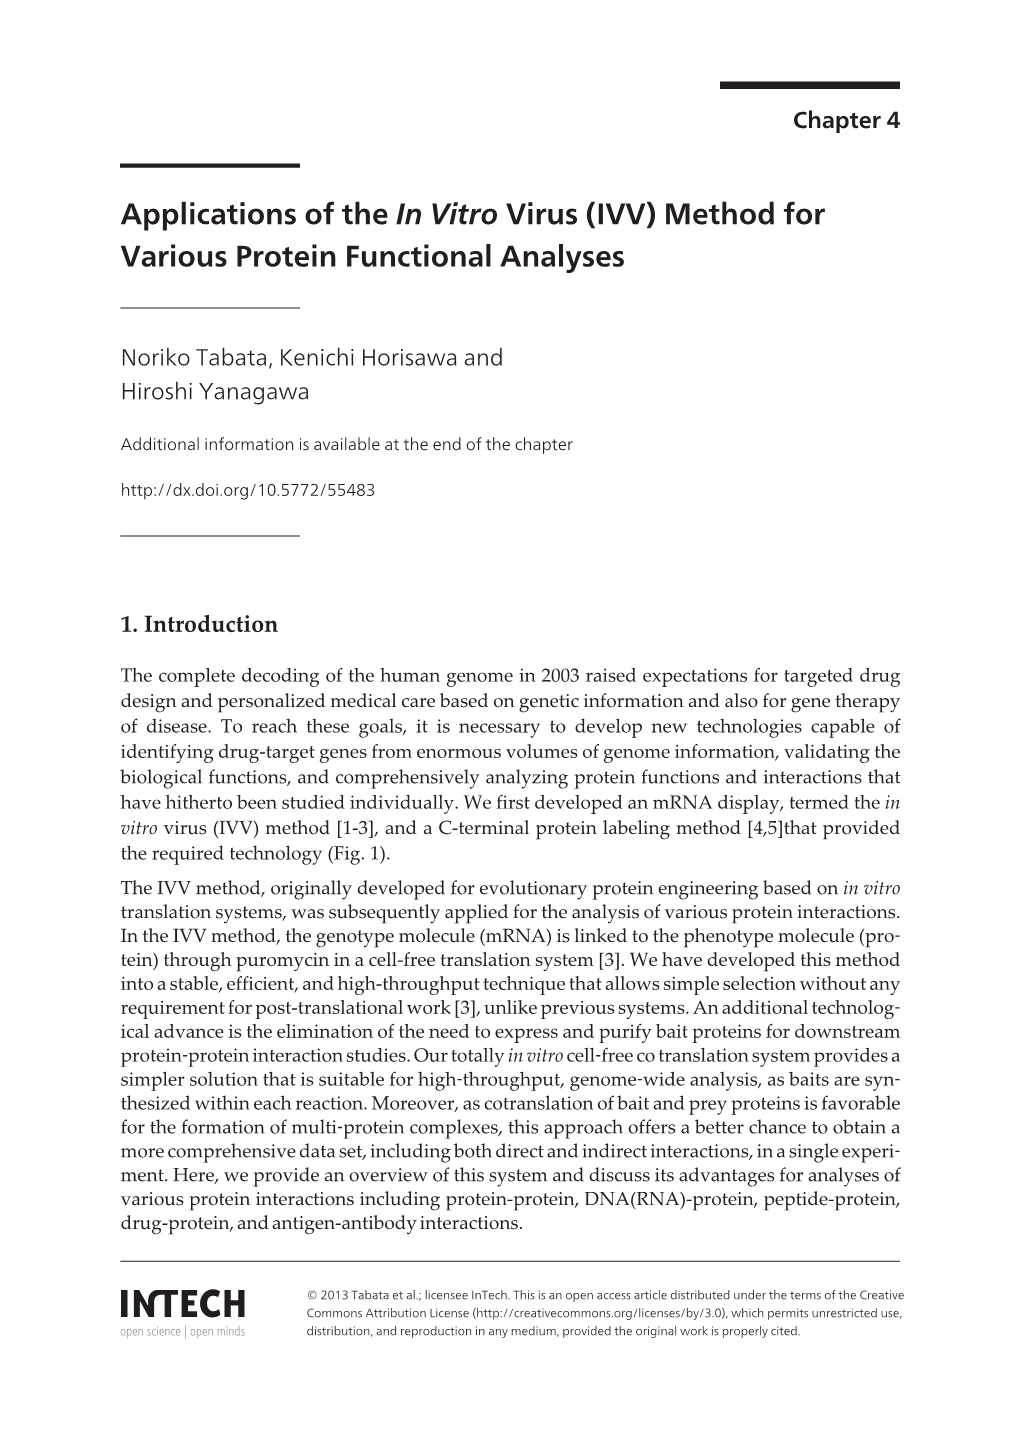 Applications of the in Vitro Virus (IVV) Method for Various Protein Functional Analyses